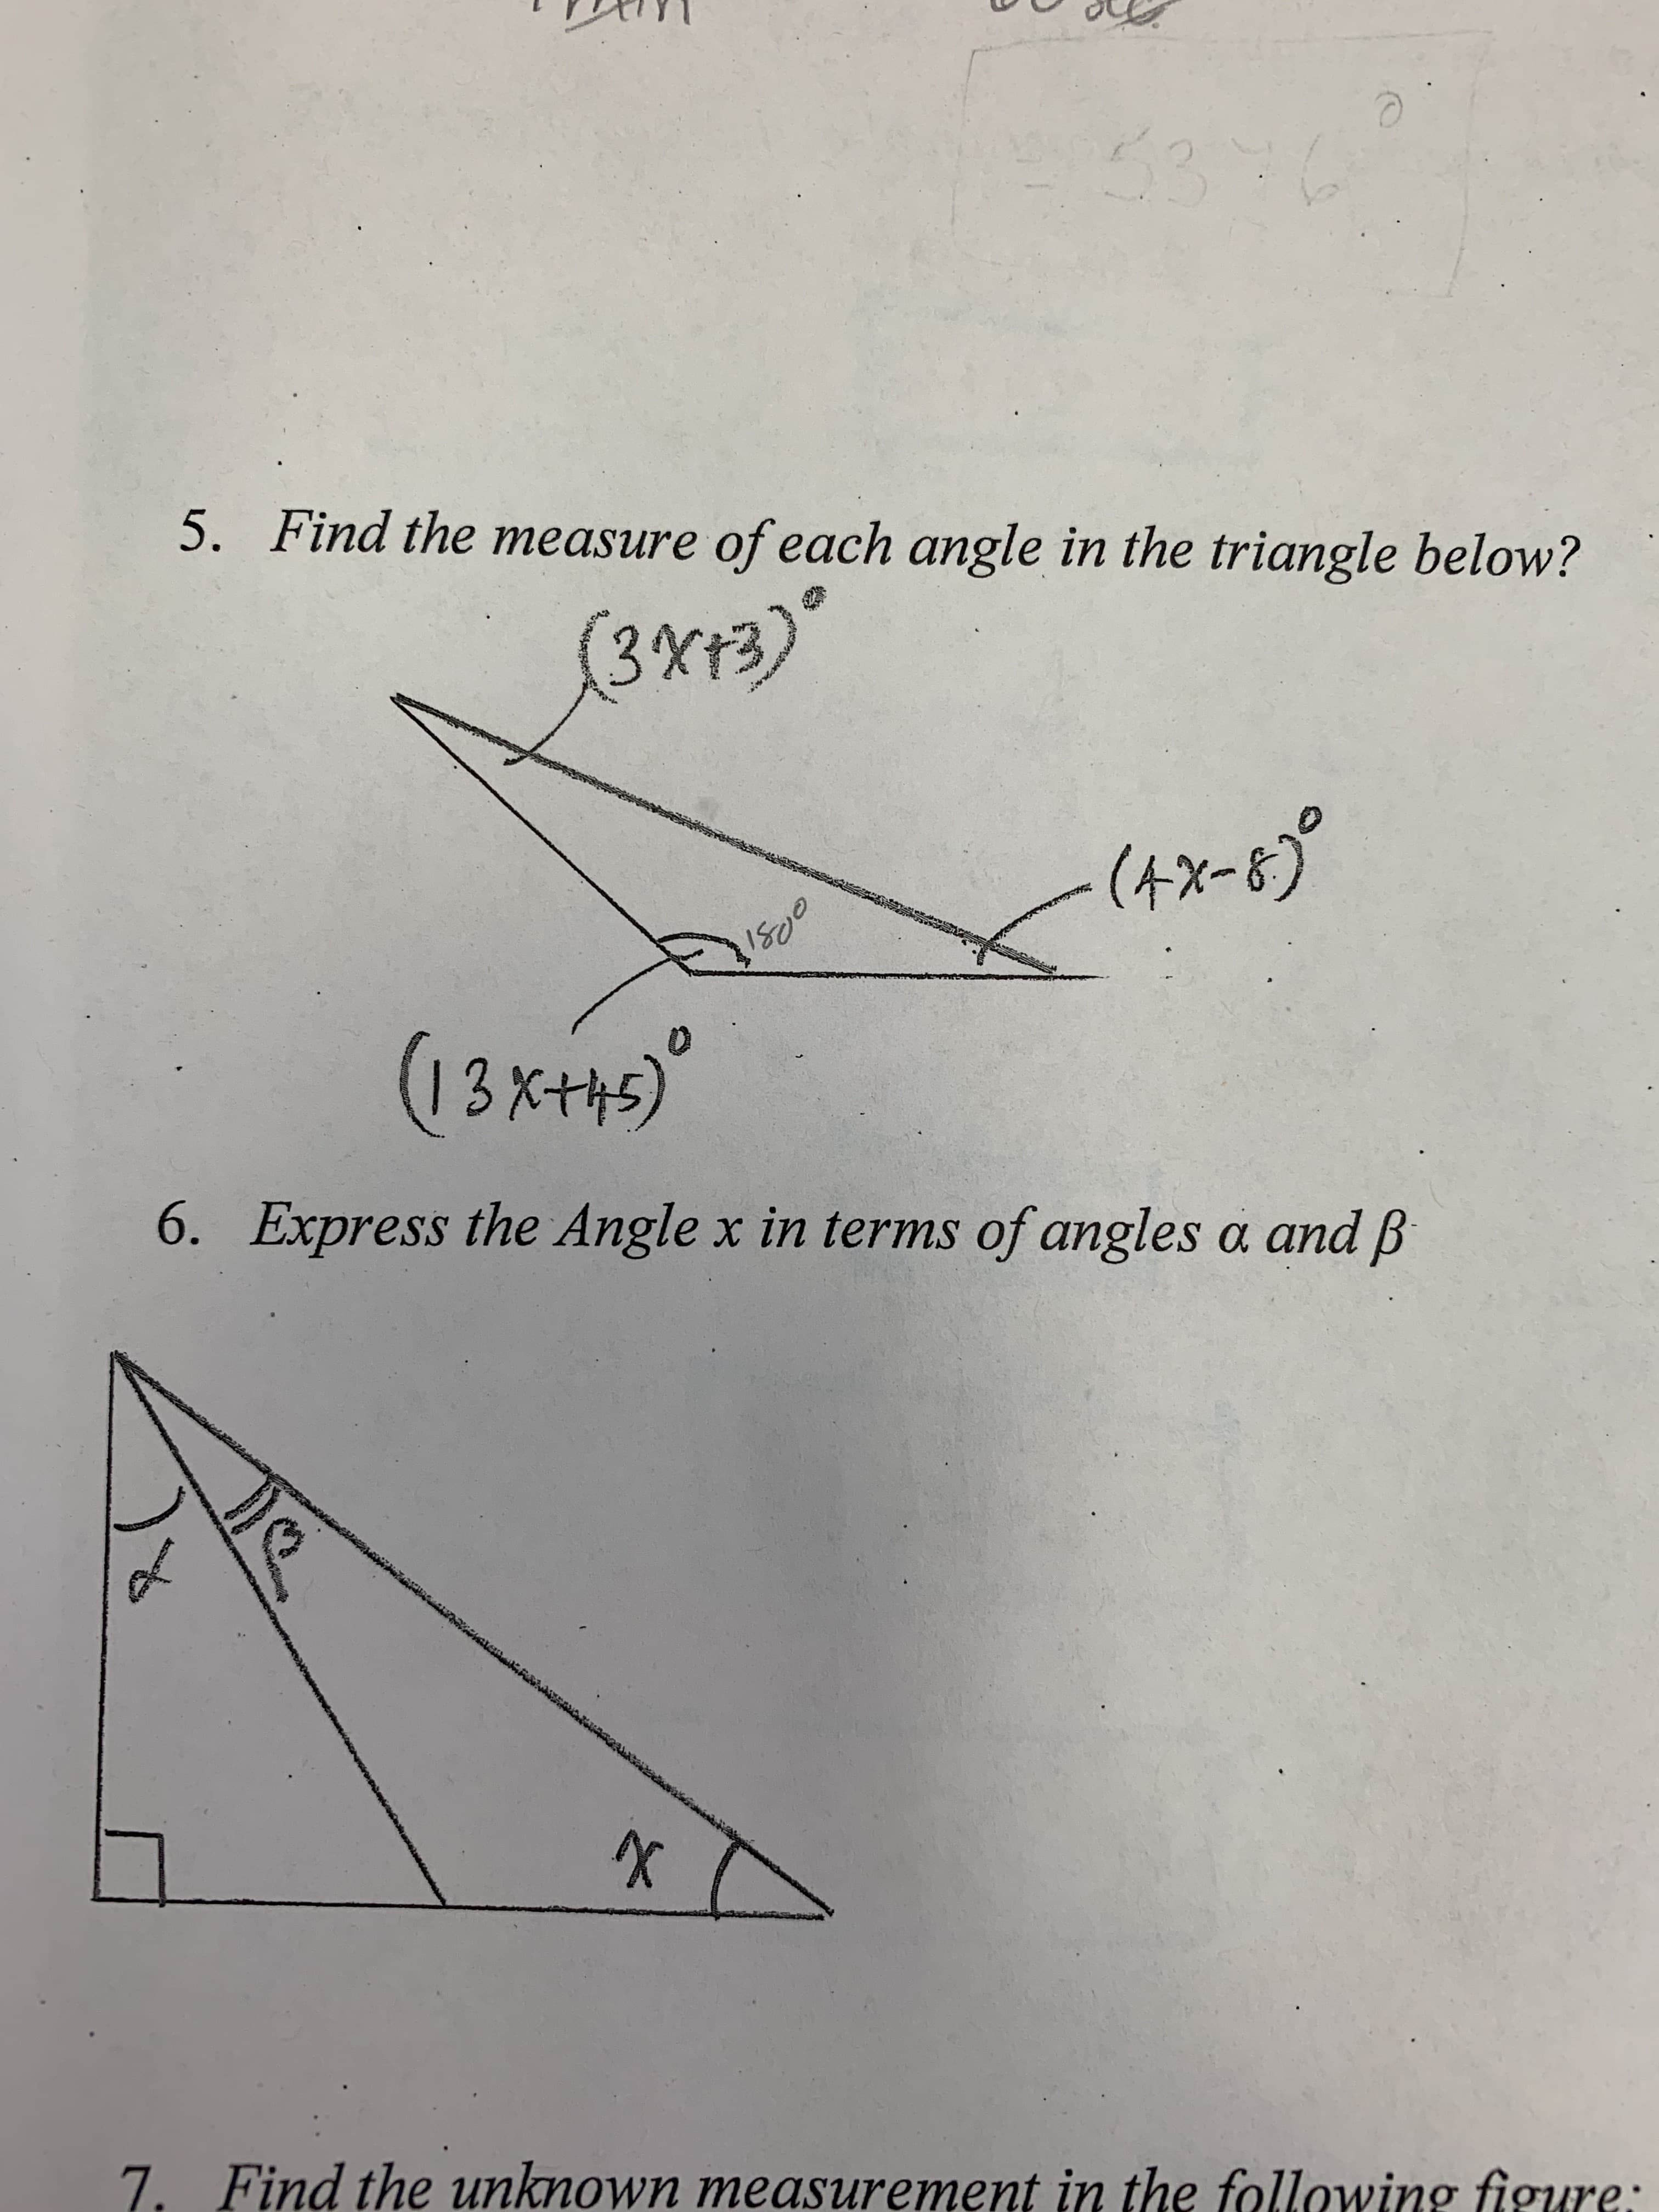 Find the measure of each angle in the triangle below?
3xt3)
0
6. Express the Angle x in terms of angles a and AB
7.
Find the unknown measurement in the following figure
